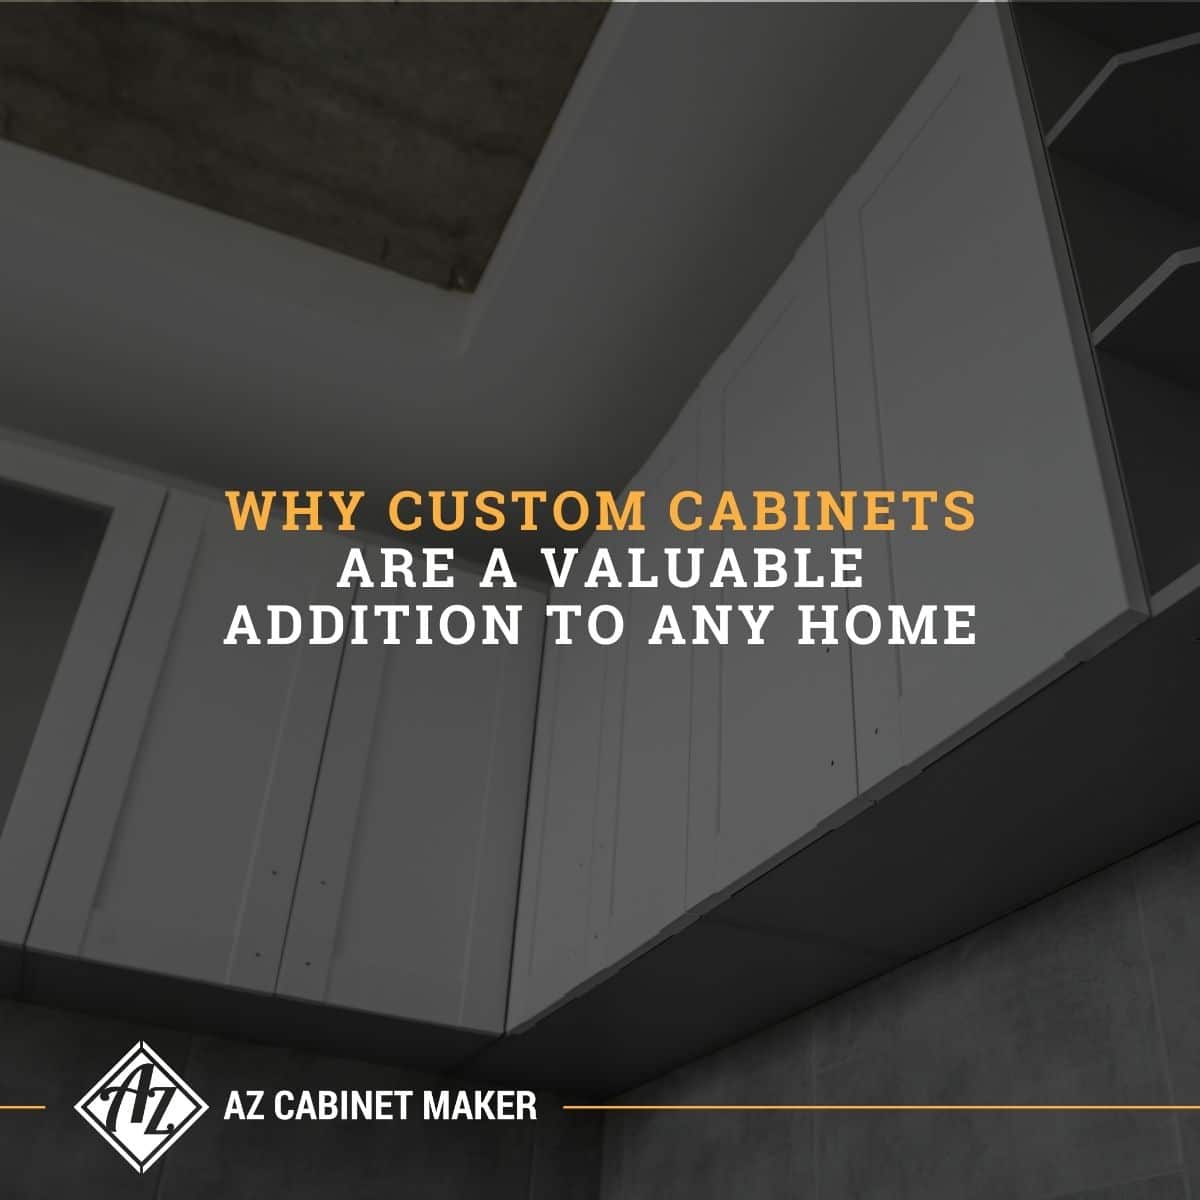 Why Custom Cabinets Are A Valuable Addition To Any Home